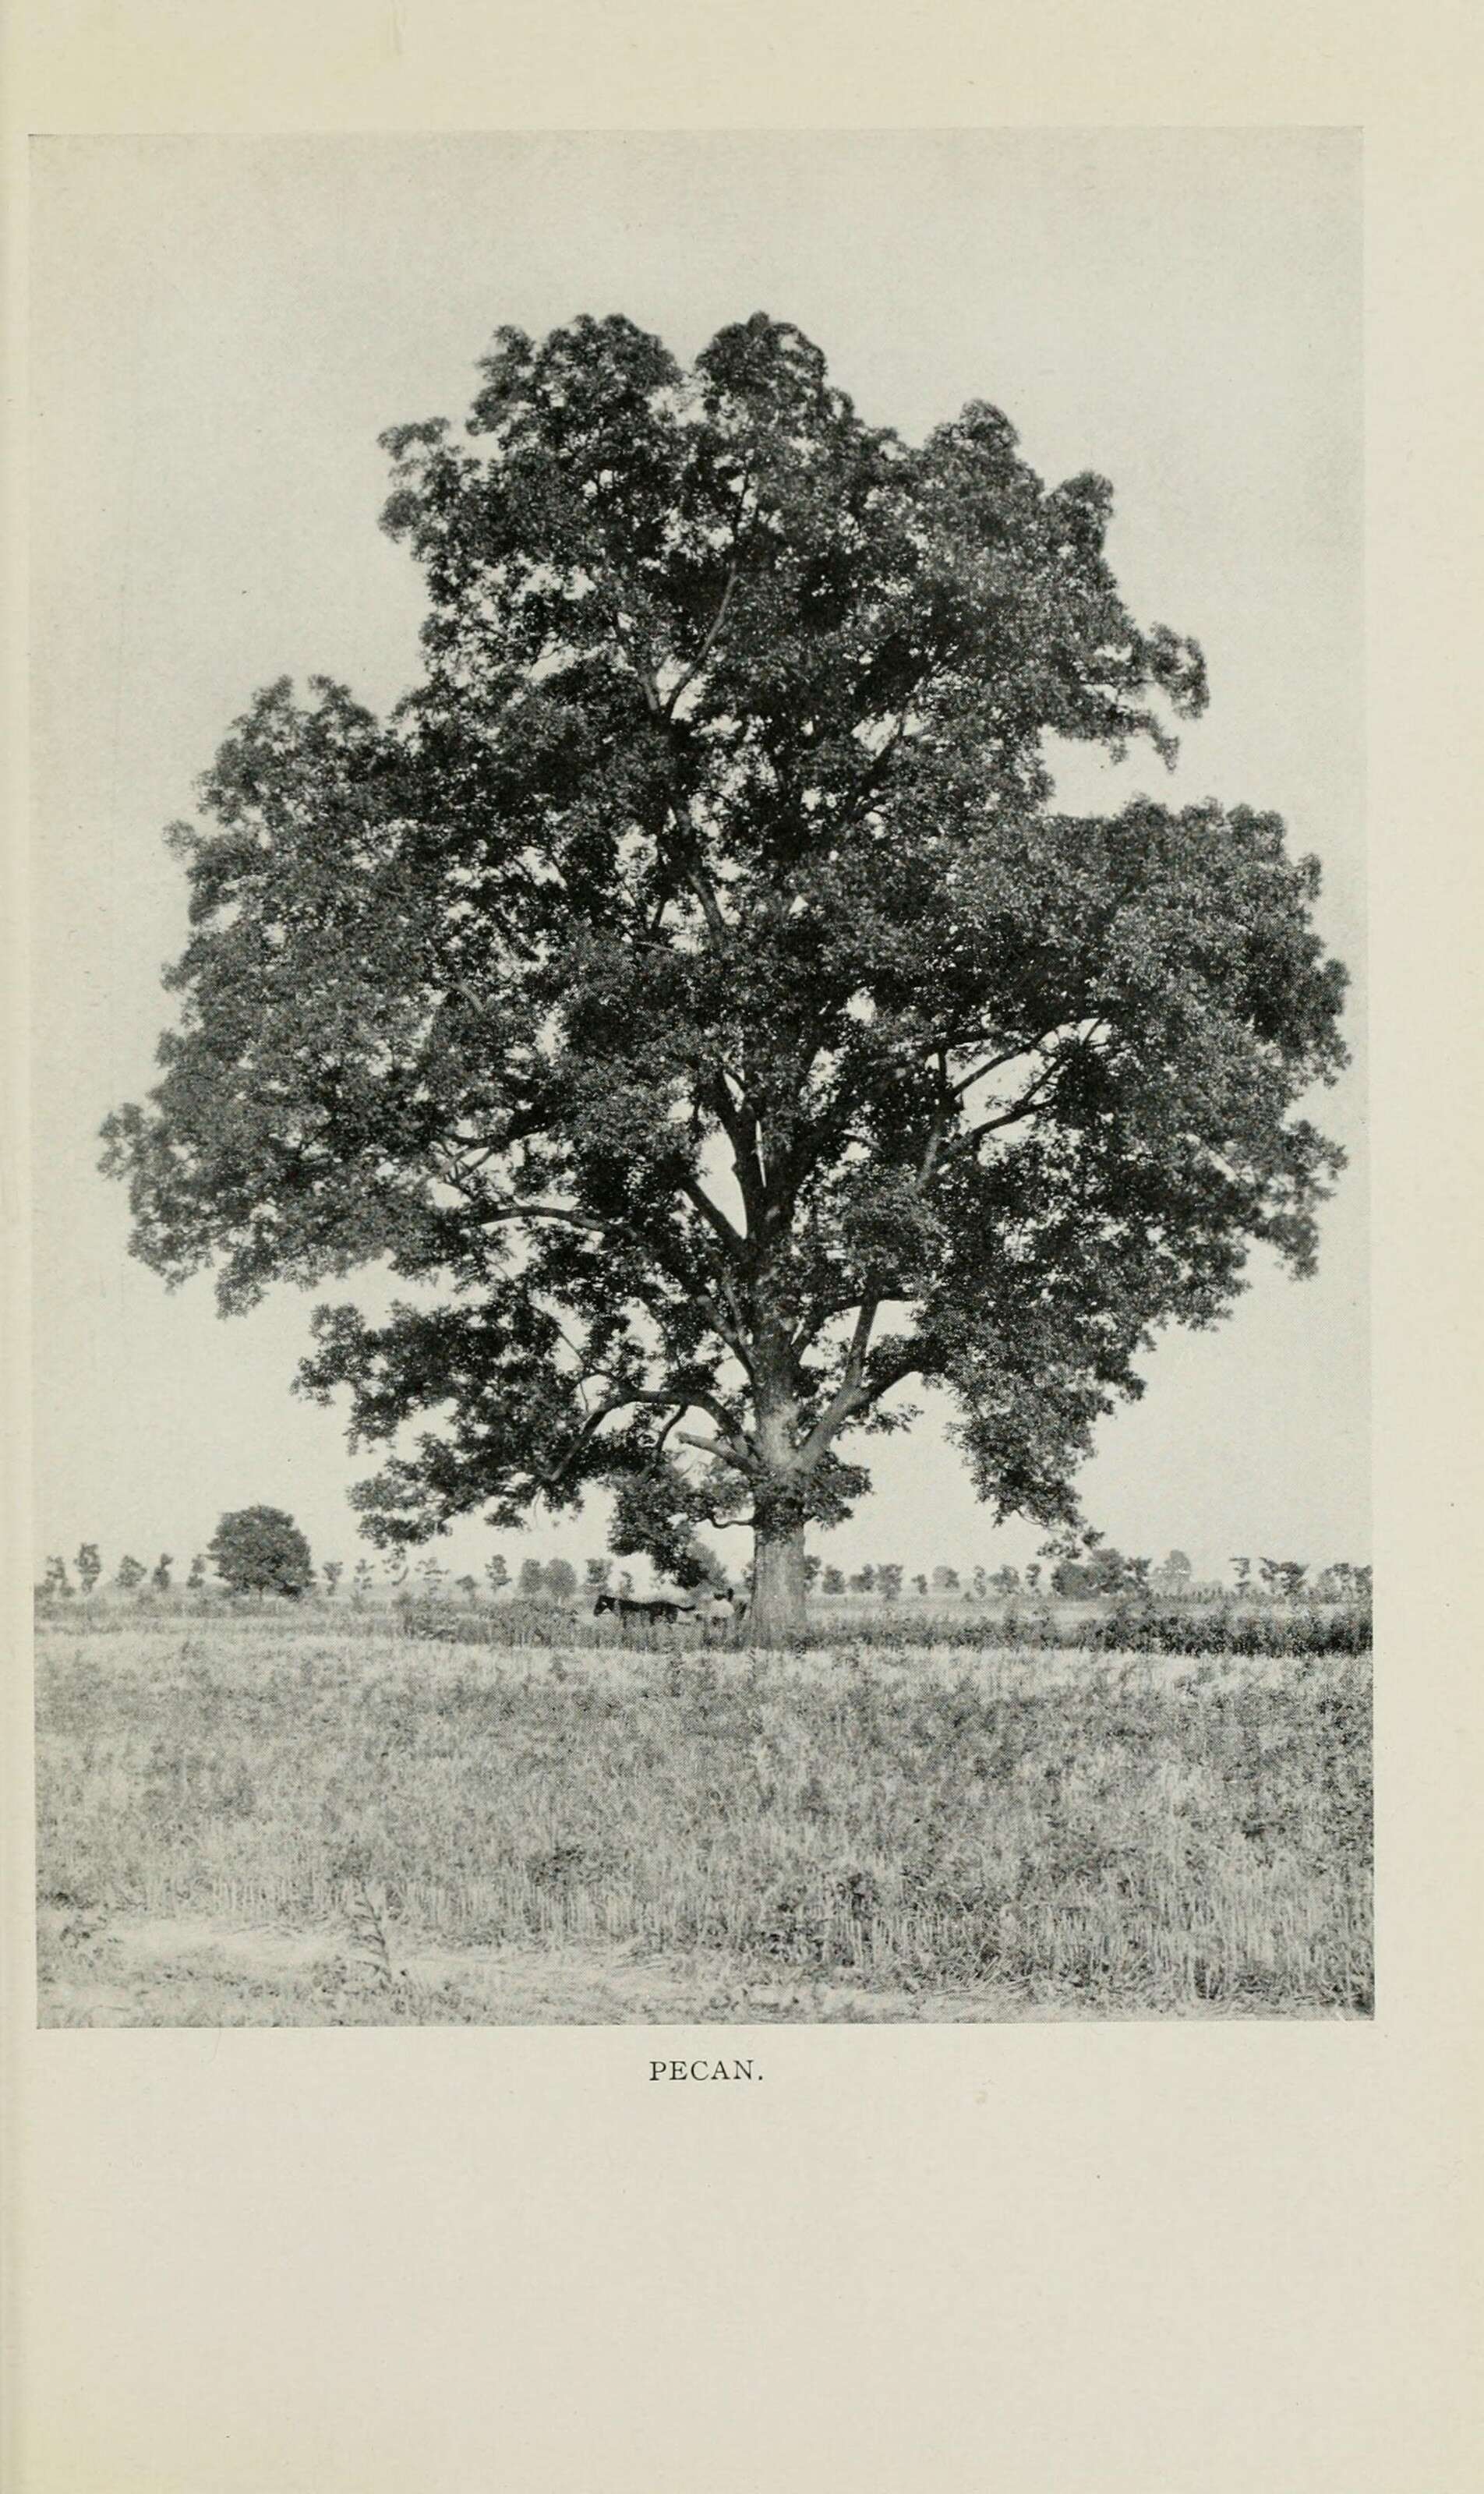 Image of hickory